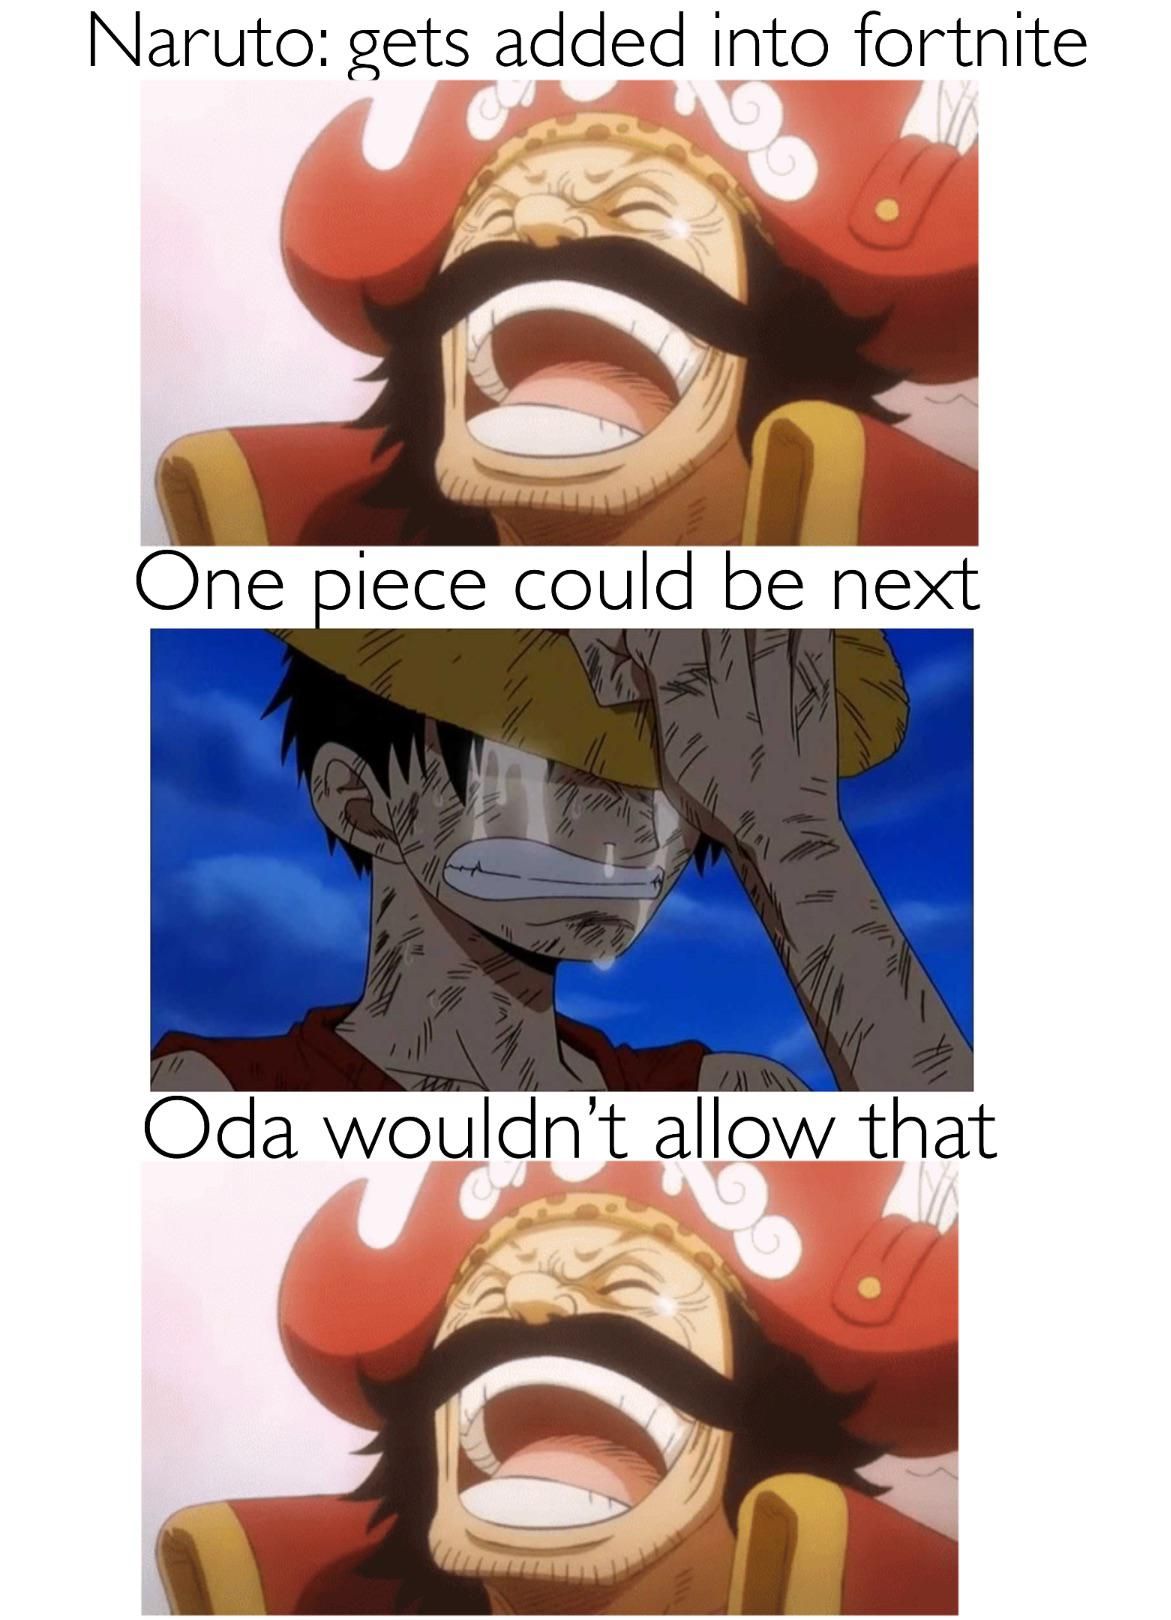 Laughs in one piece